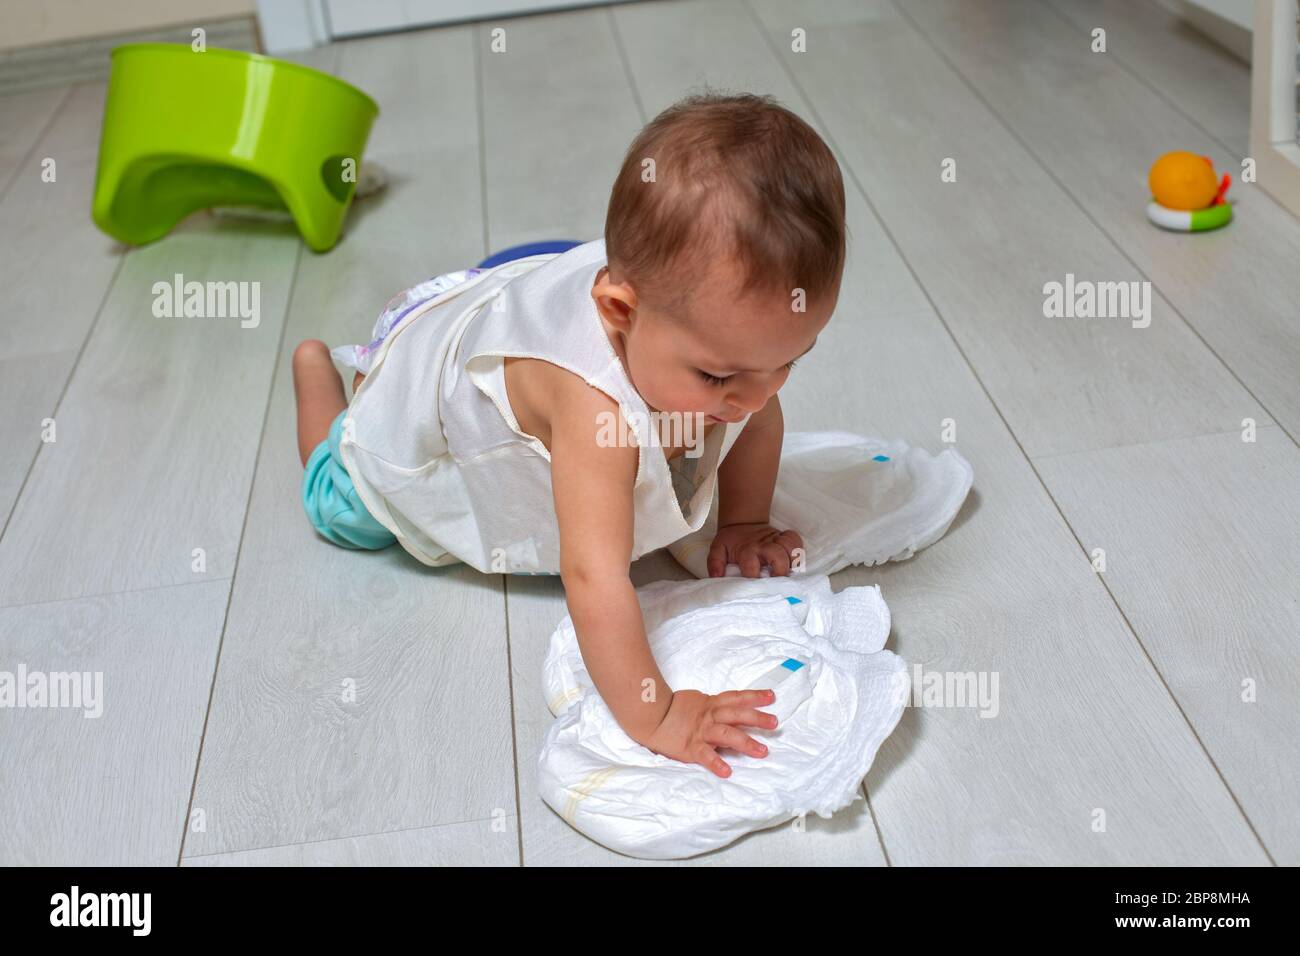 potty training concept. A cute little baby in a room on the bright floor plays with a diaper and an inverted green pot. soft focus Stock Photo